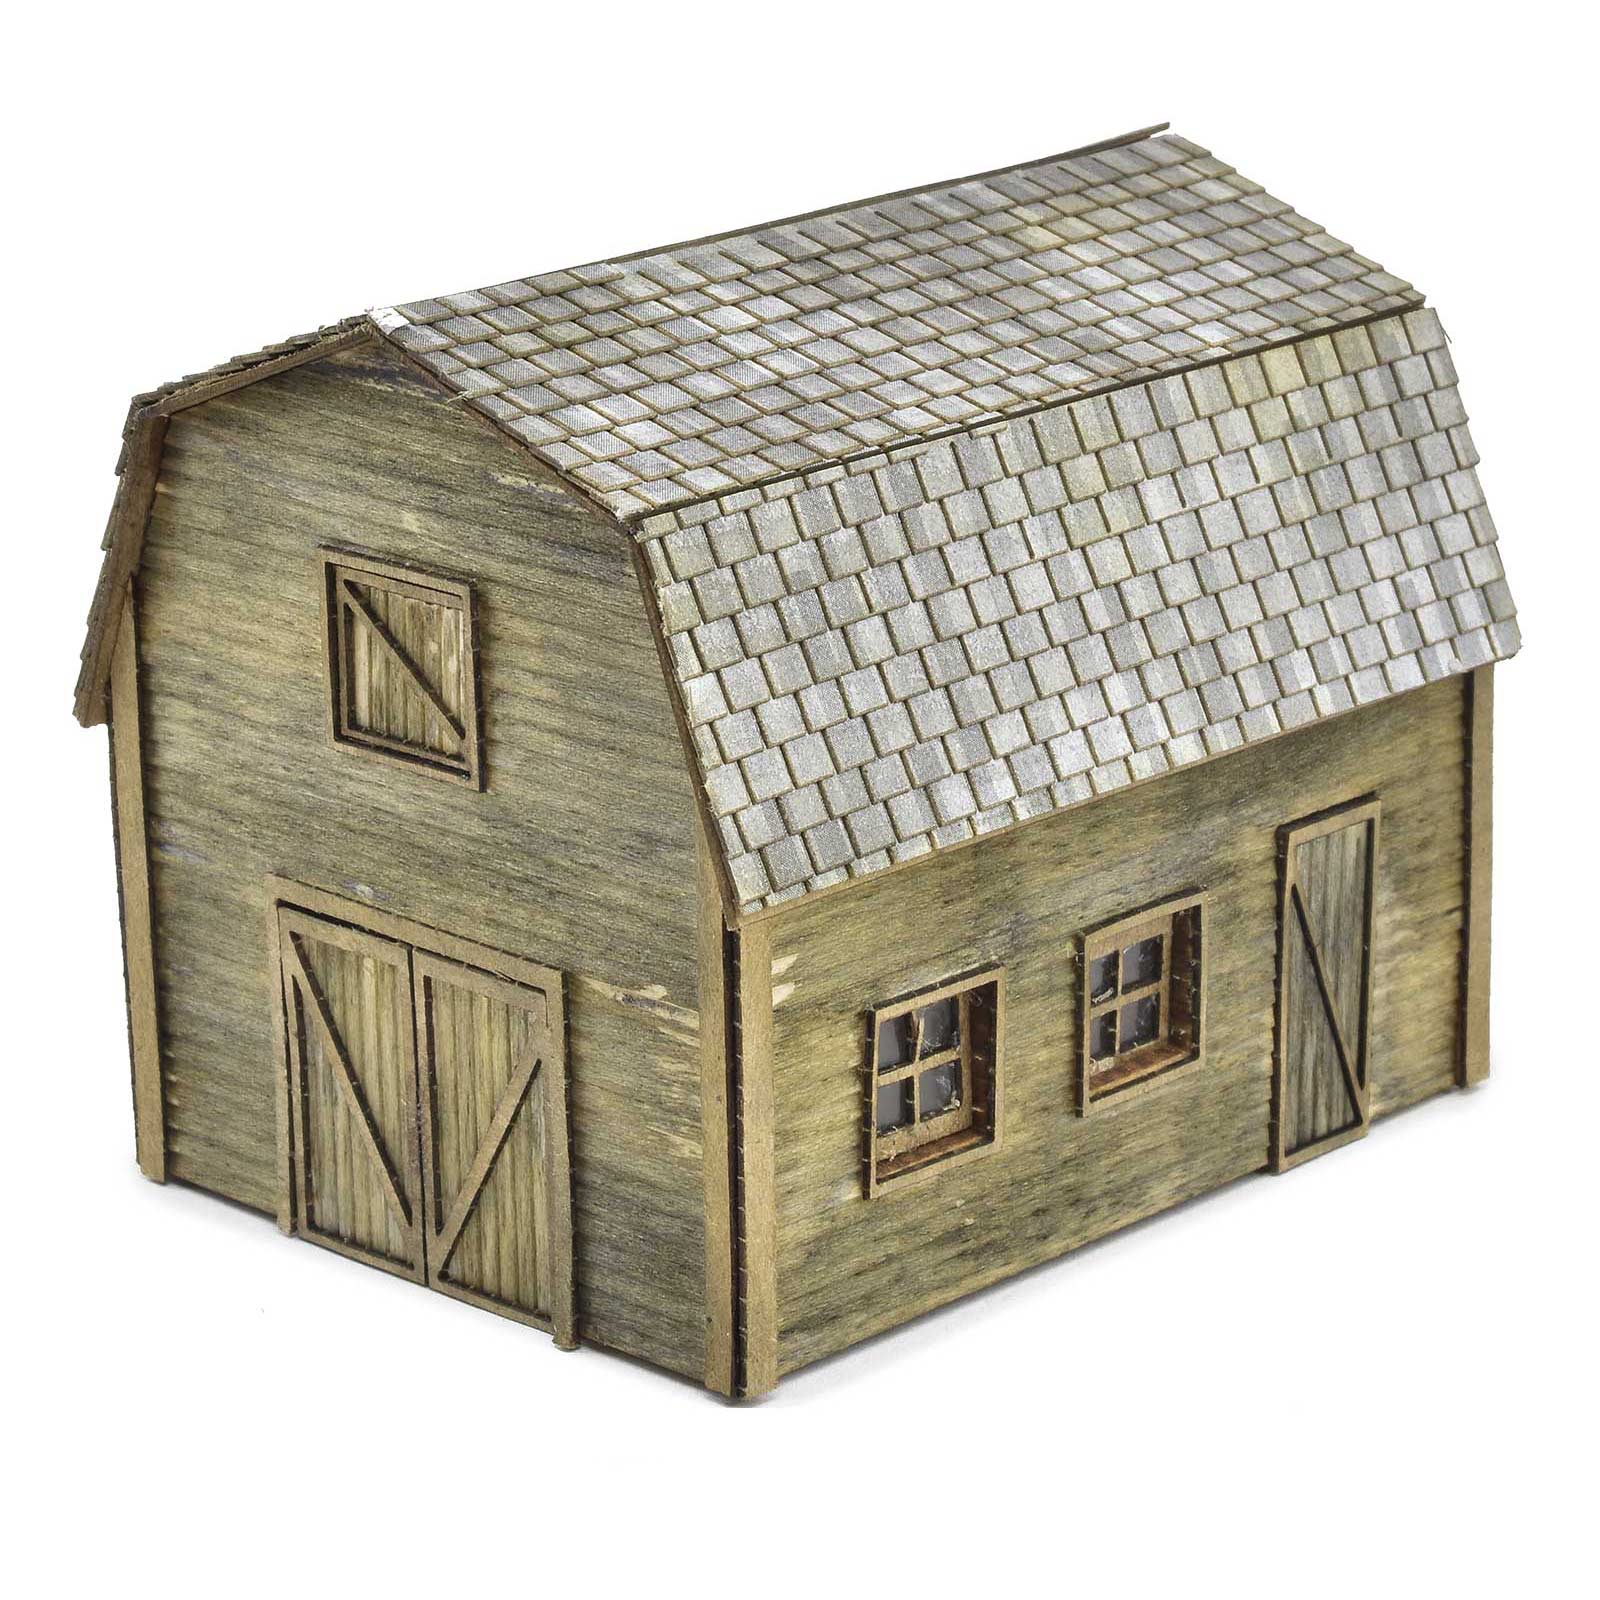 Rural Tractor Shed with Hayloft Kit, HO Scale, By Scientific